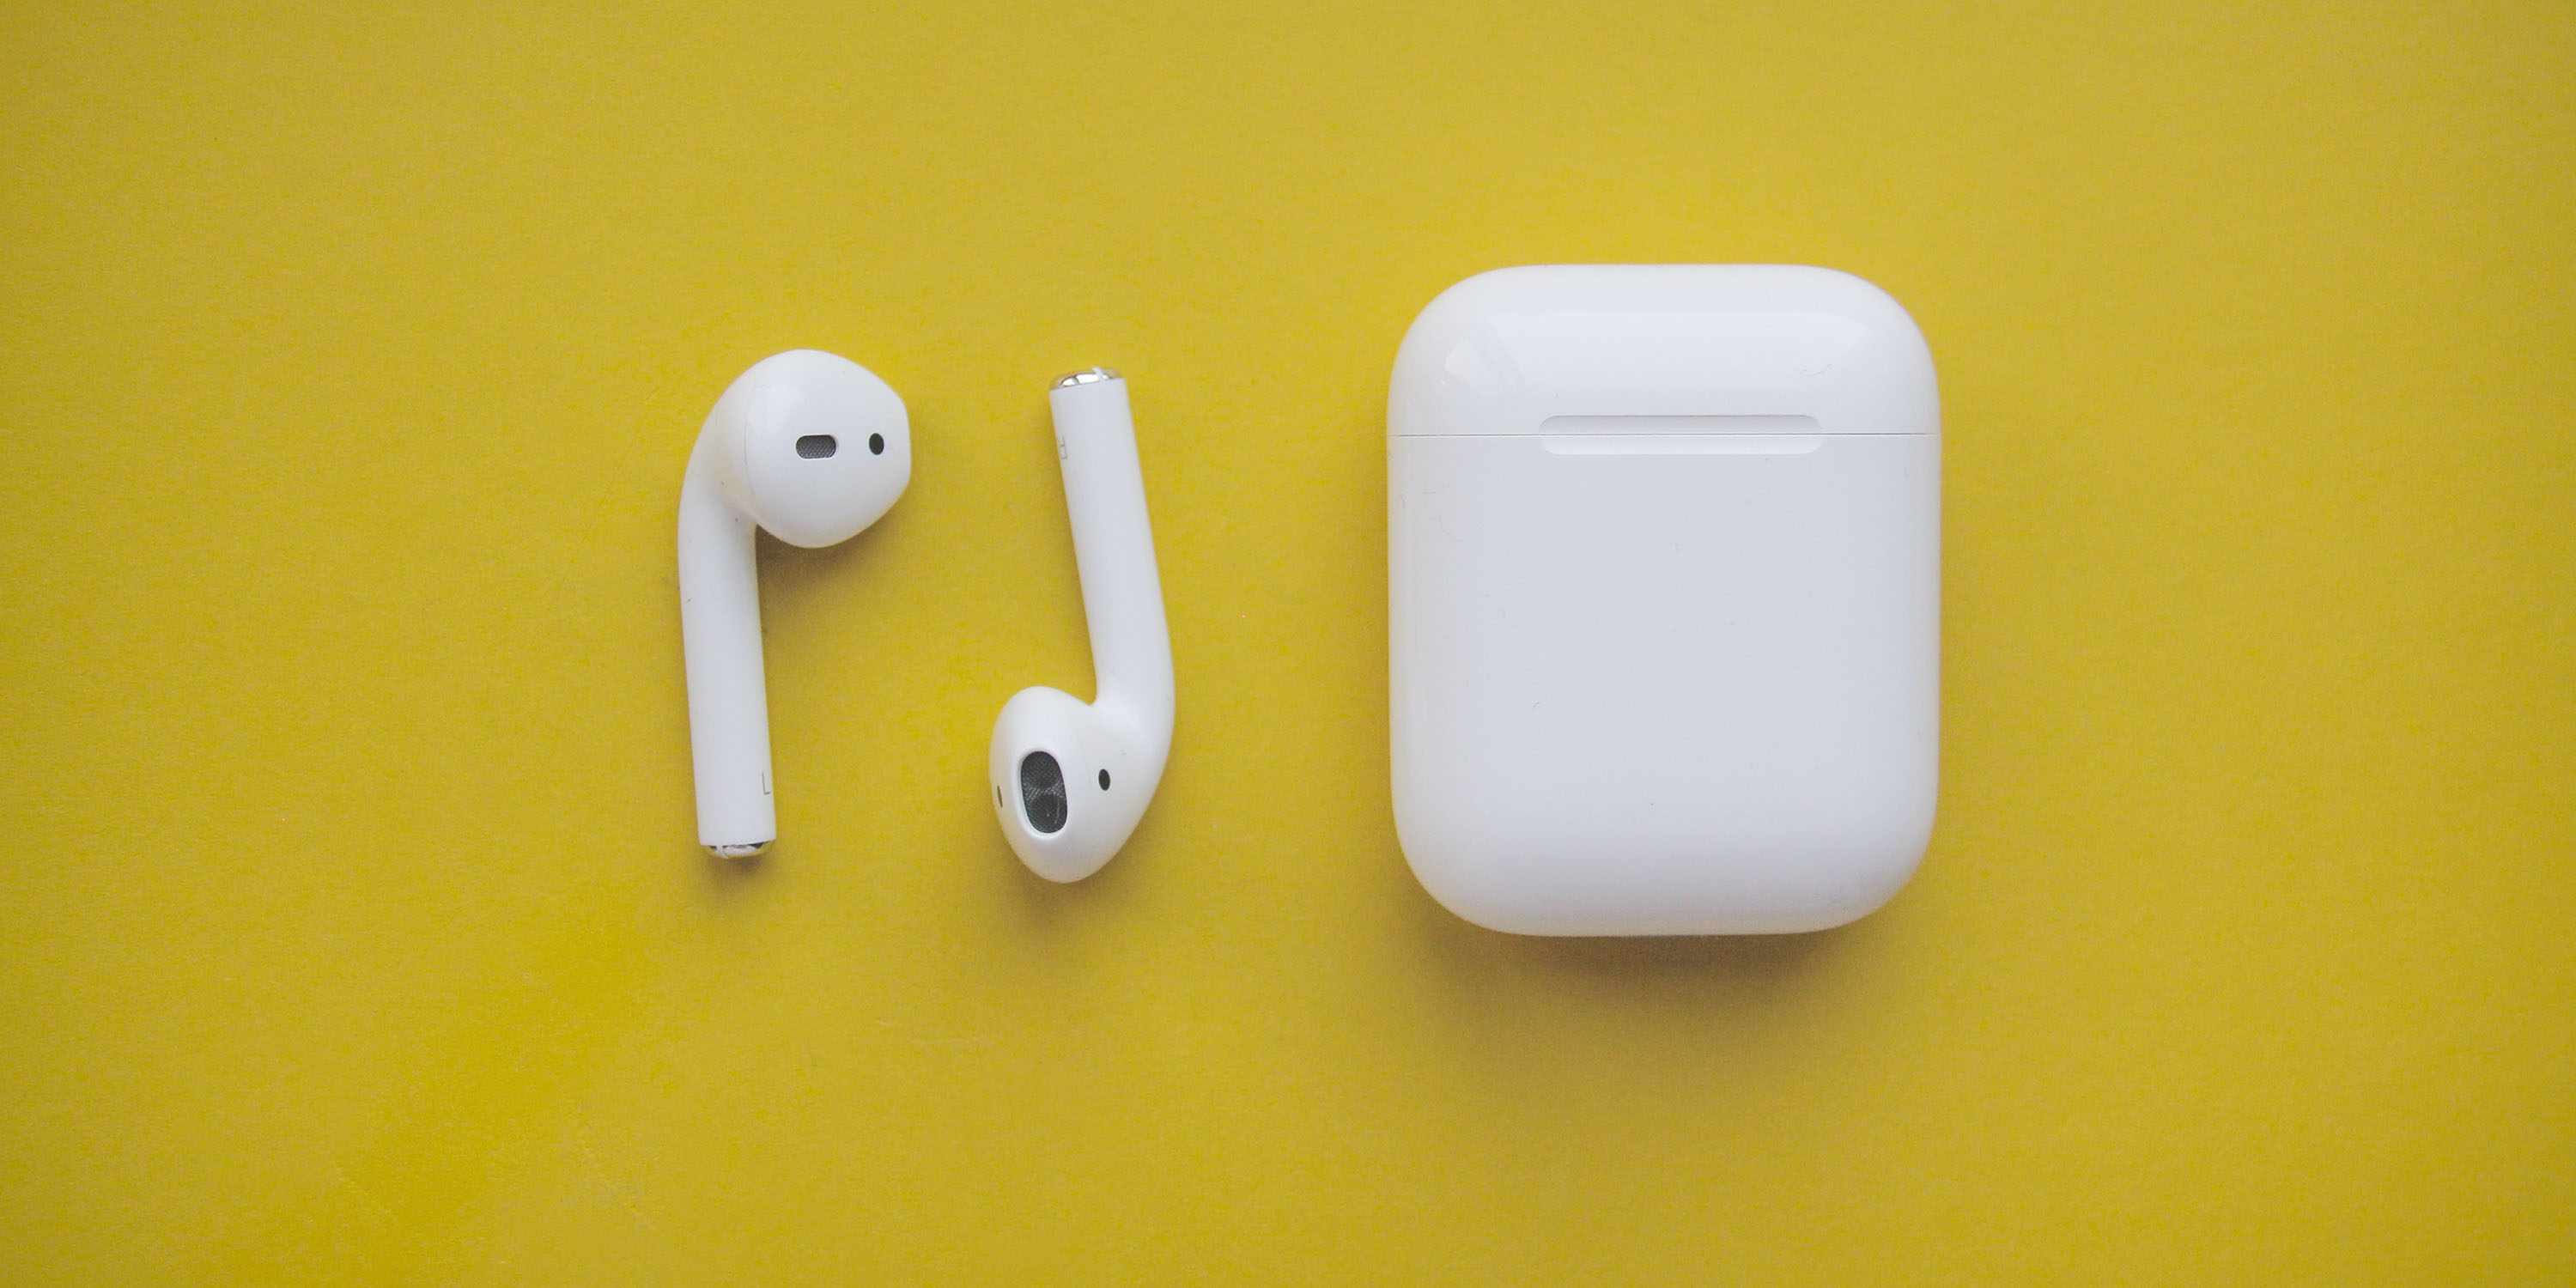 Fake AirPods cost Apple $3.2B this year, on - 9to5Mac